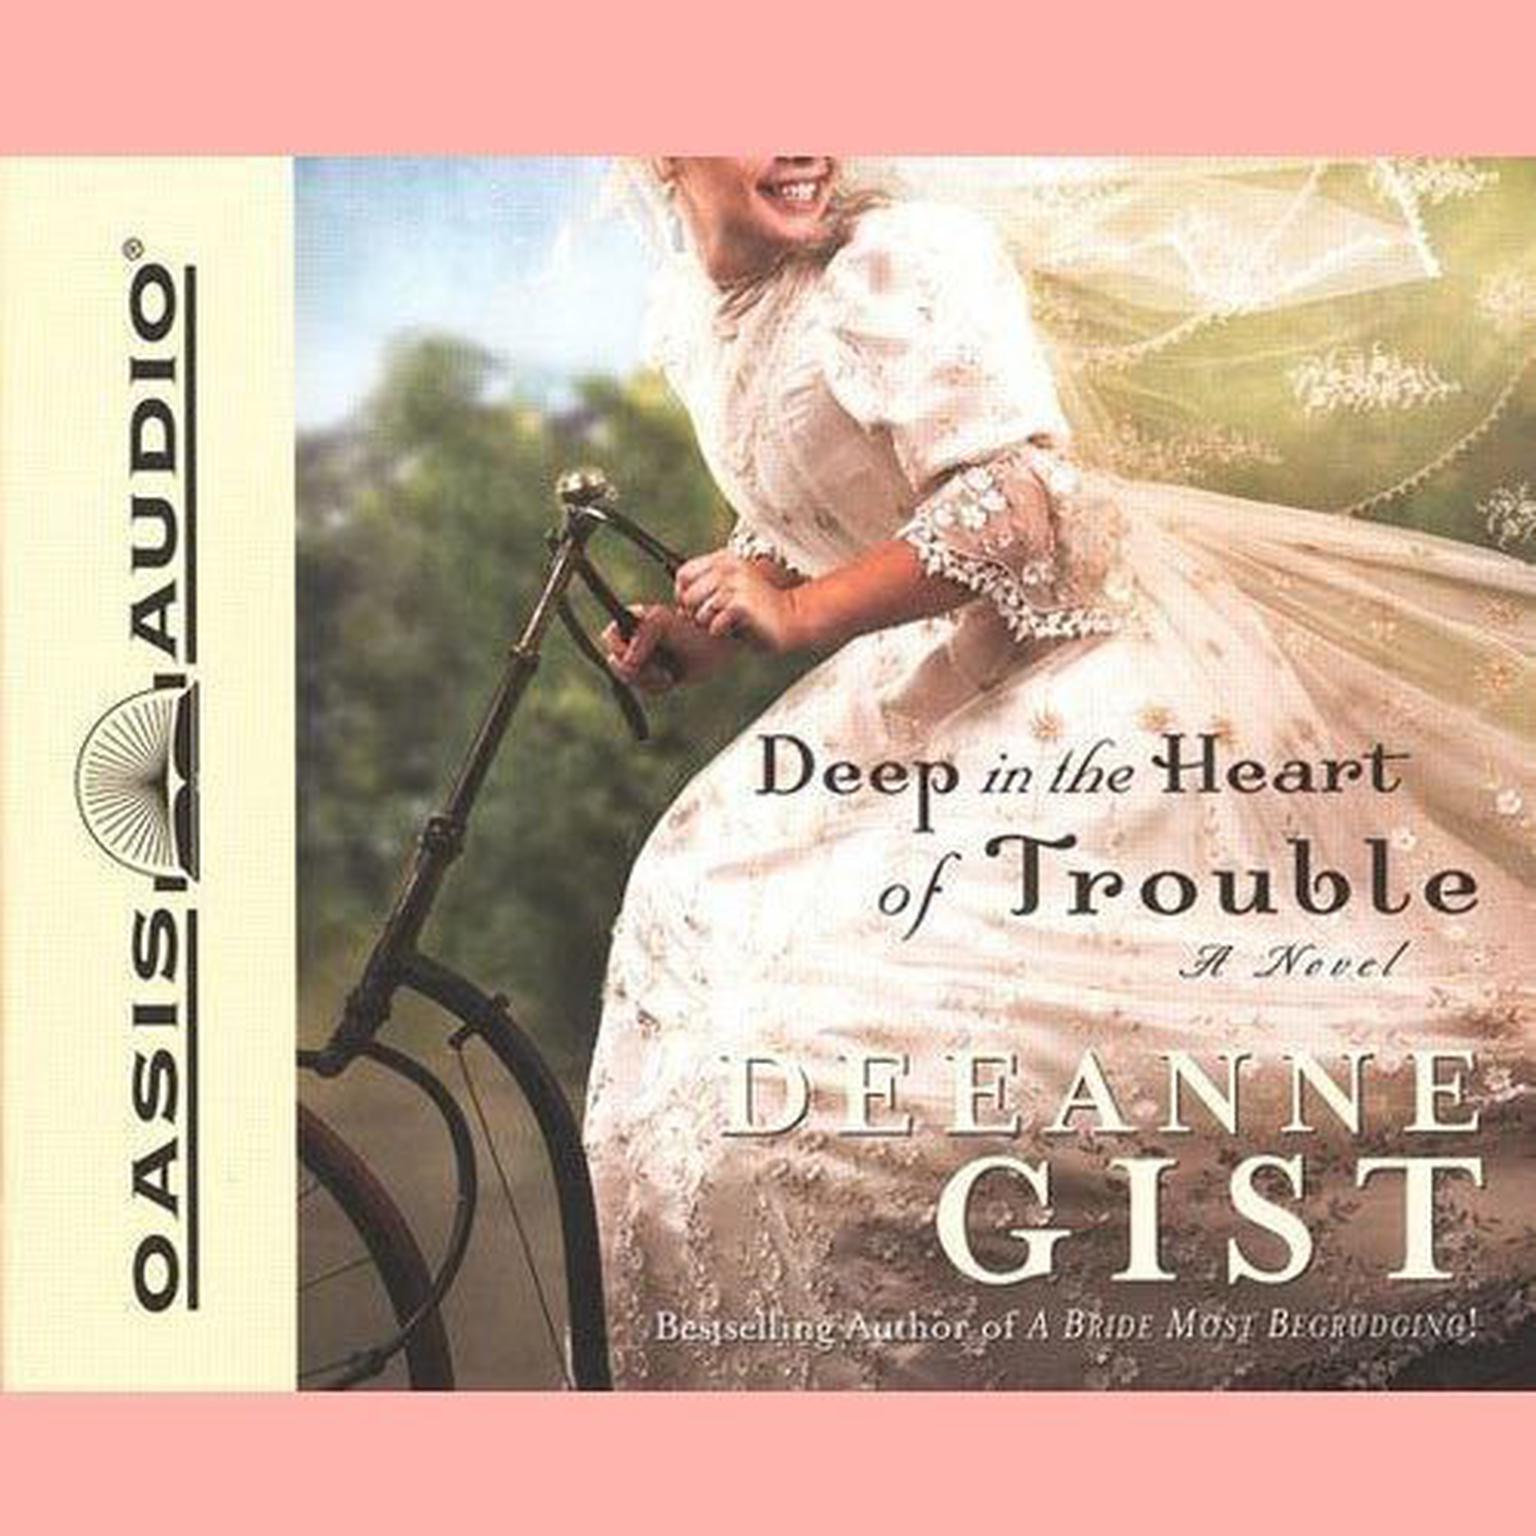 Deep in the Heart of Trouble (Abridged) Audiobook, by Deeanna Gist